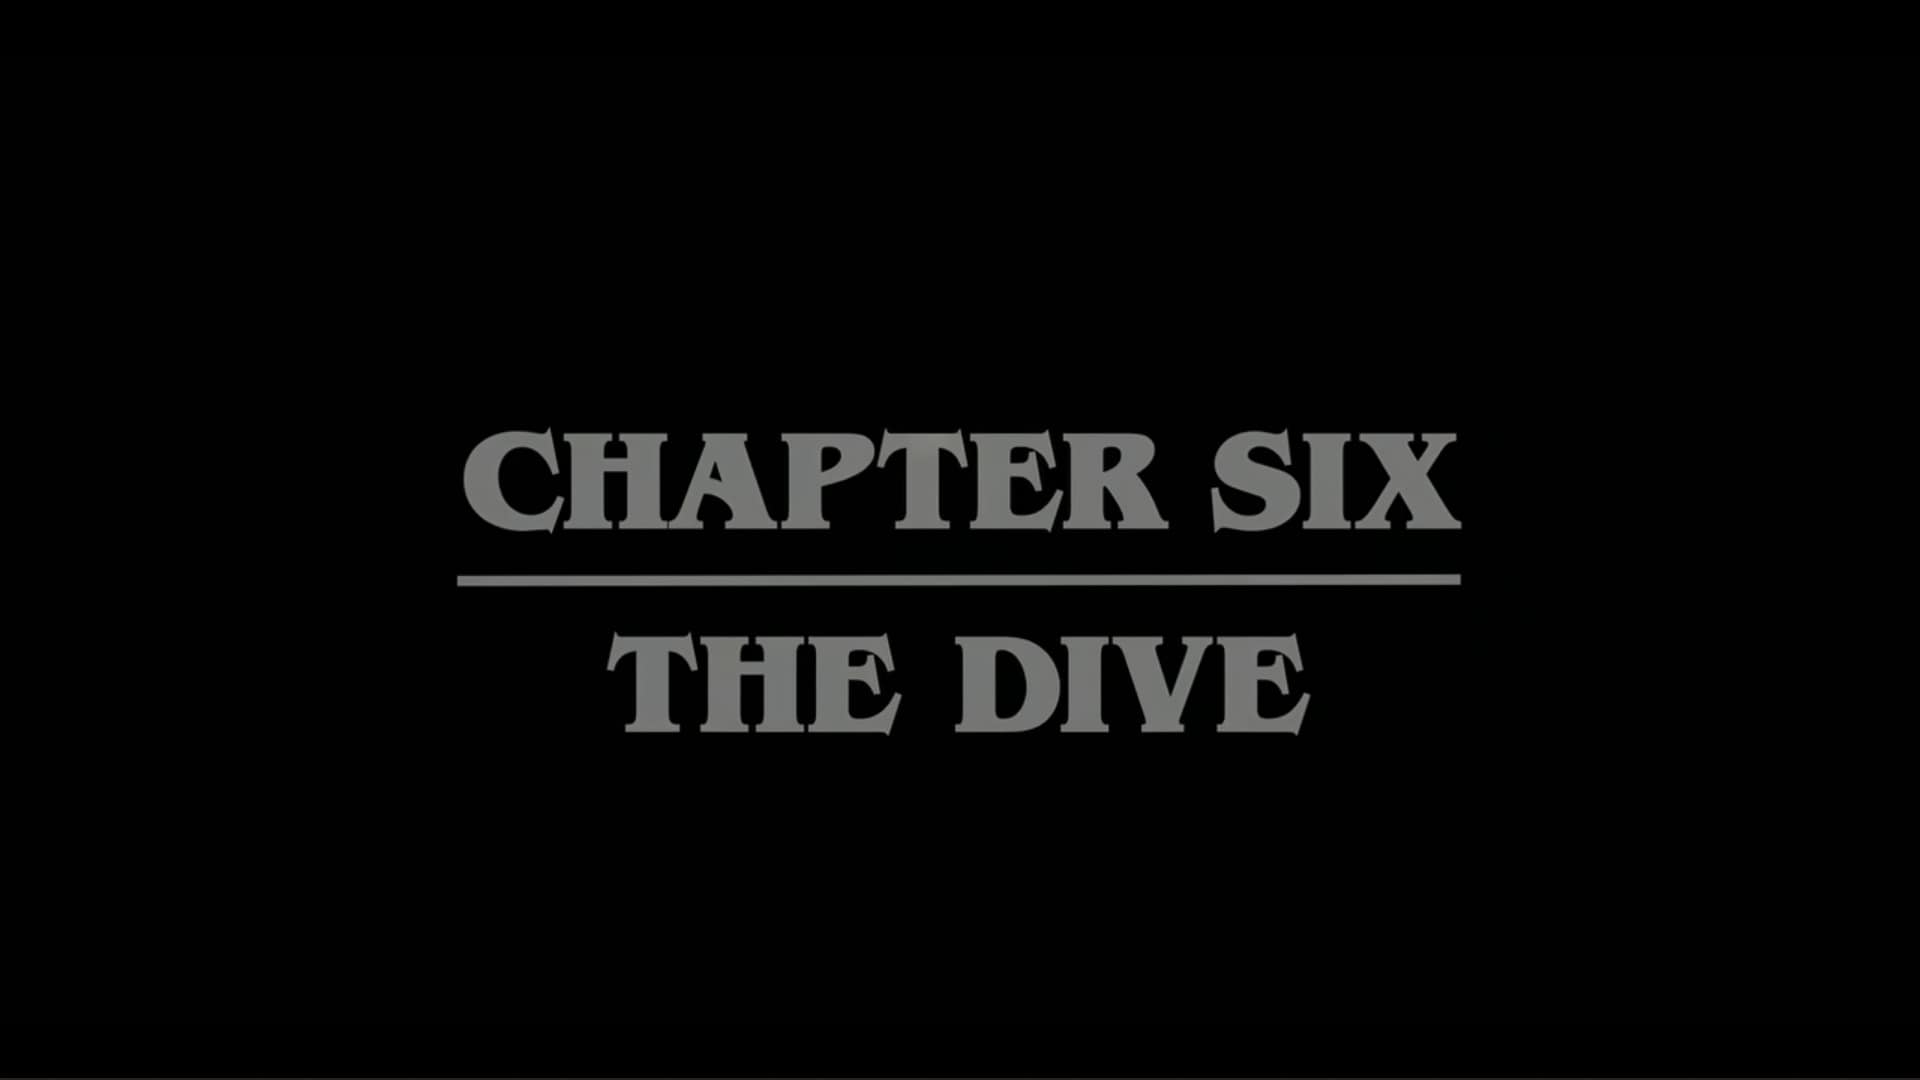 Title Card - Stranger Things Season 4 Episode 6 “Chapter Six The Dive”